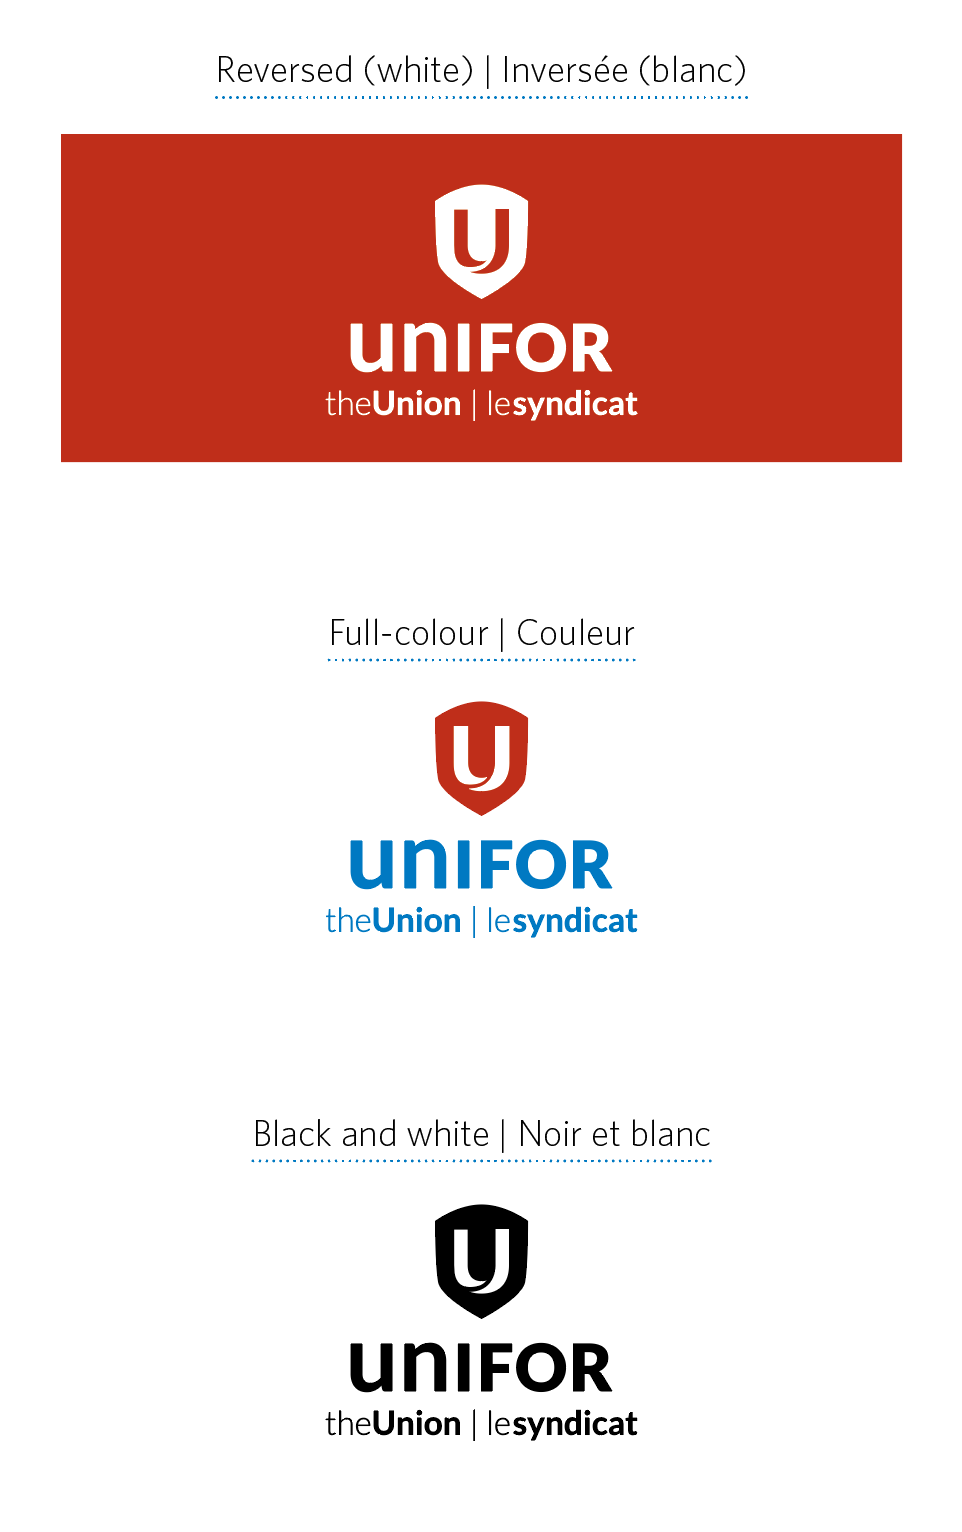 Unifor logo in three accepted colour variations, white, full-colour, and black